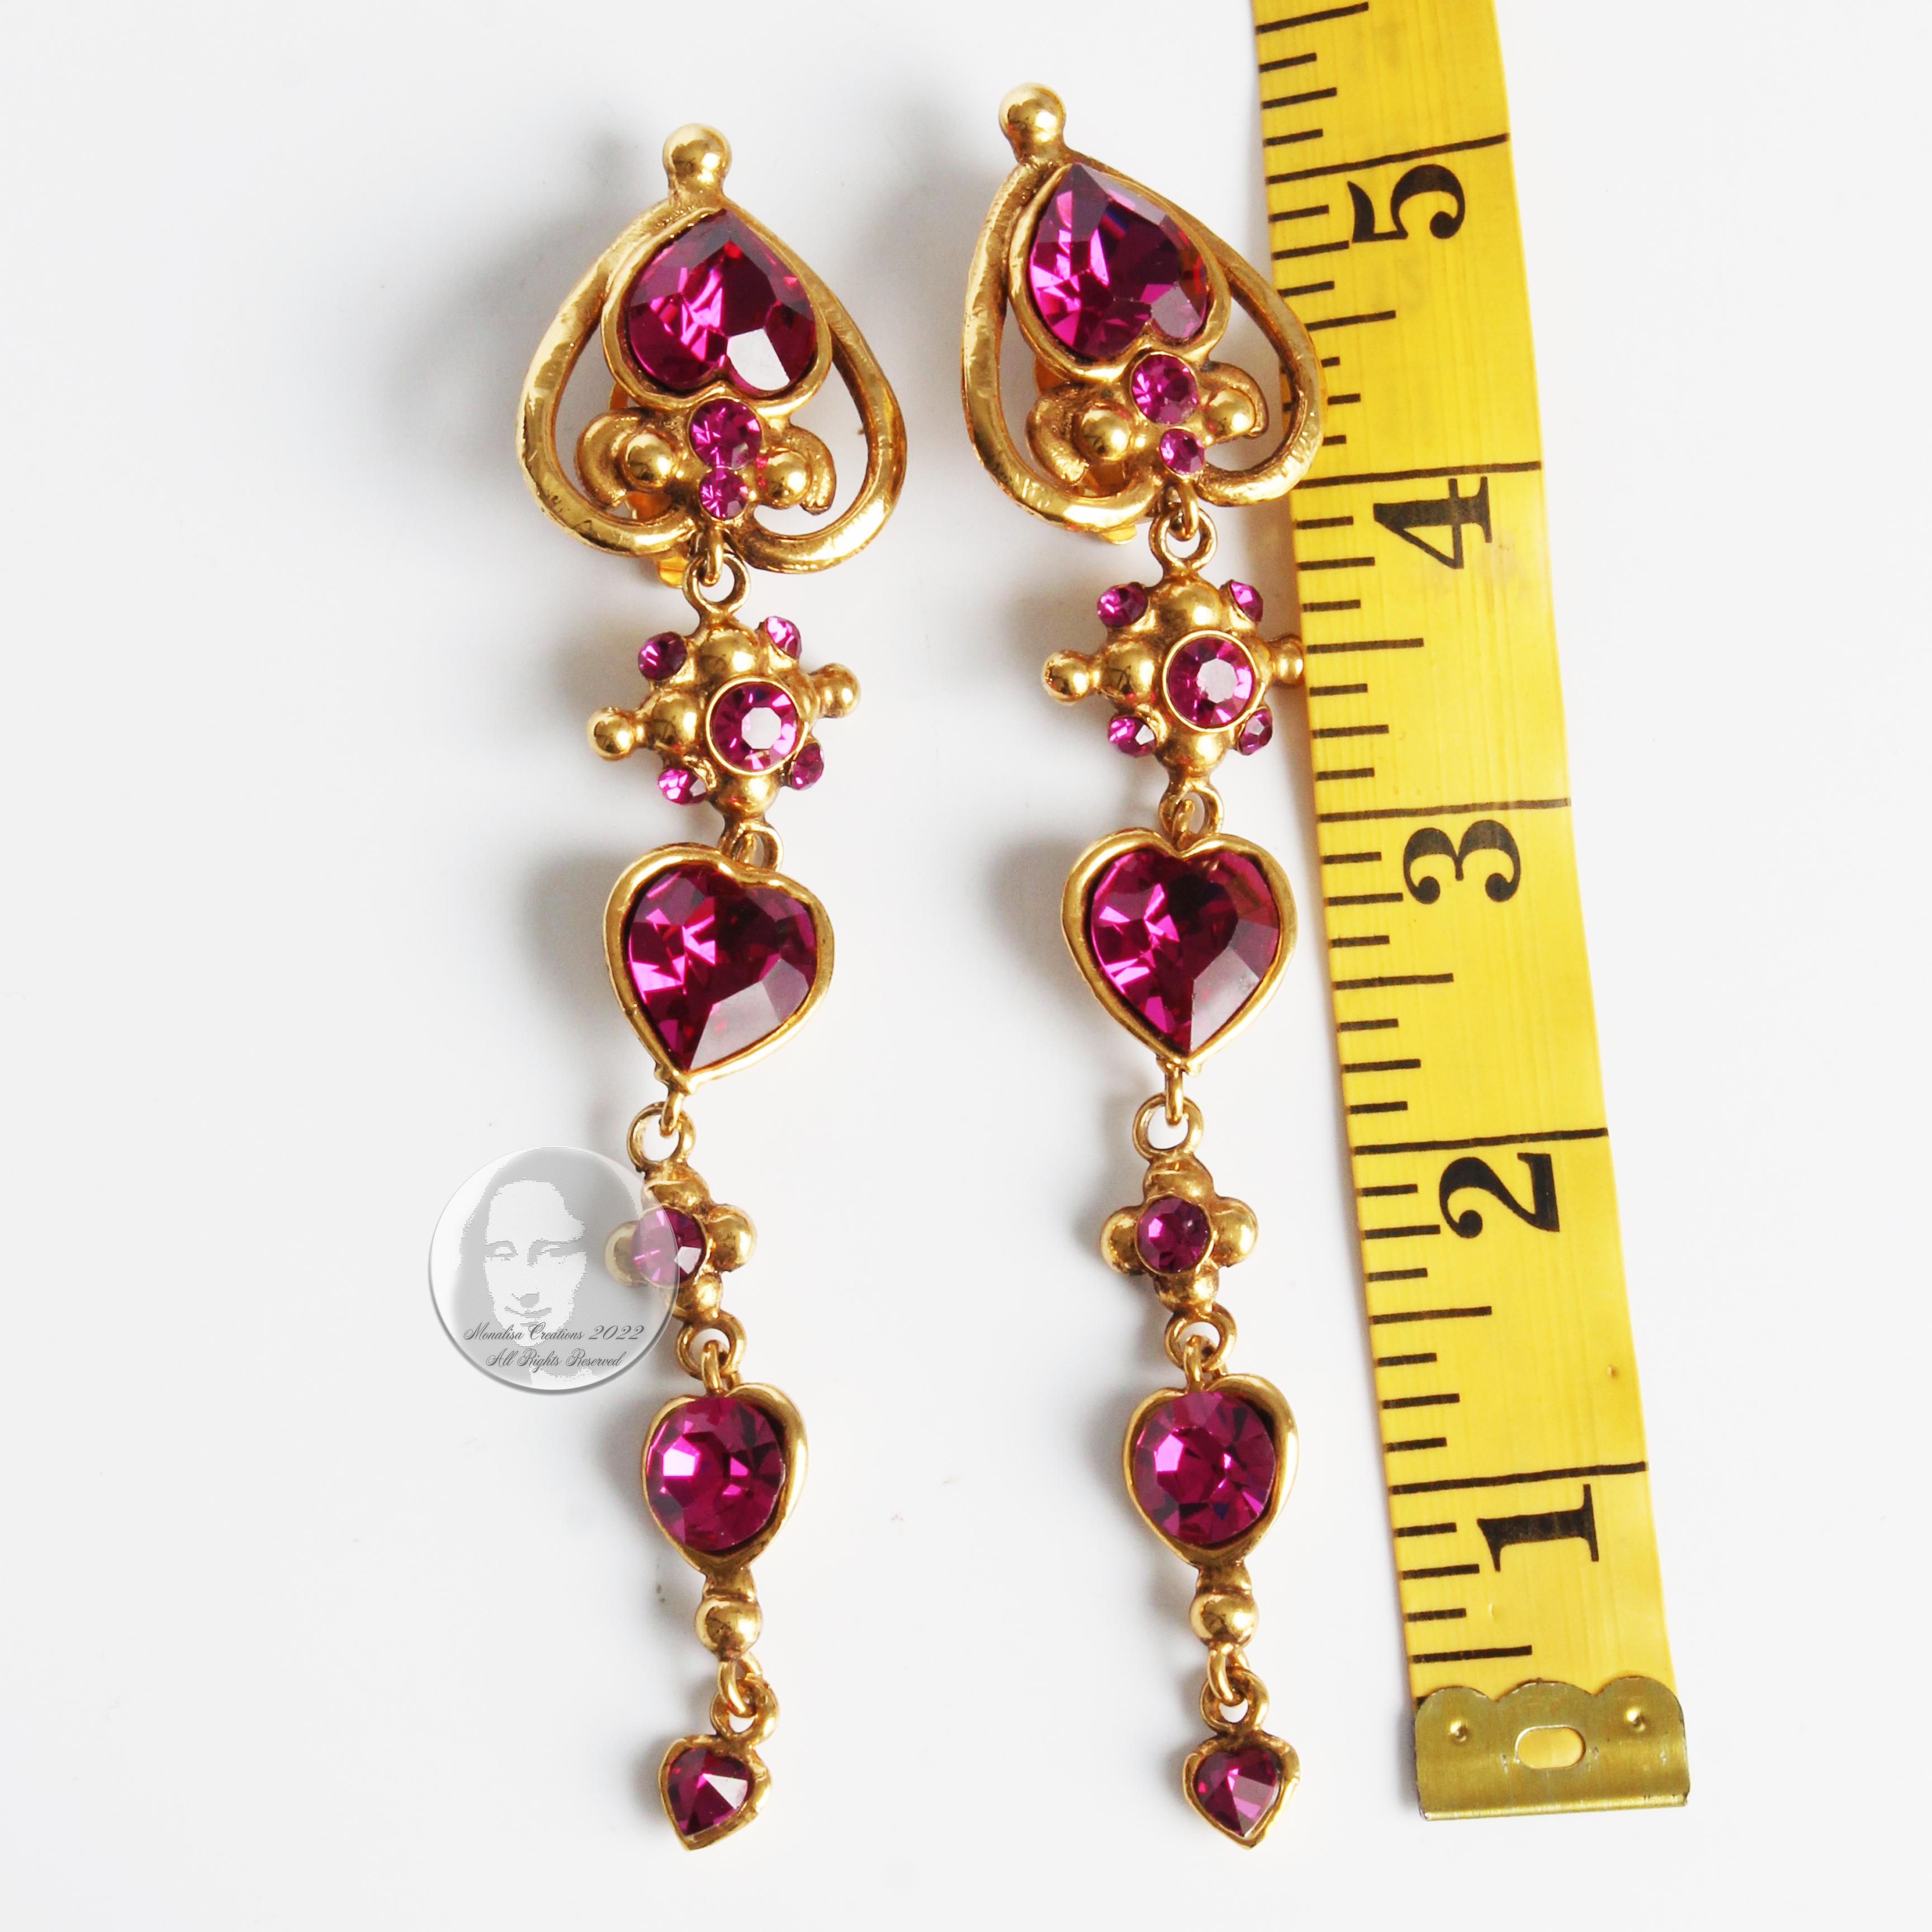 Emanuel Ungaro Earrings Long Dangle Pink Crystals Baroque Oversized 5in Vintage In Good Condition For Sale In Port Saint Lucie, FL